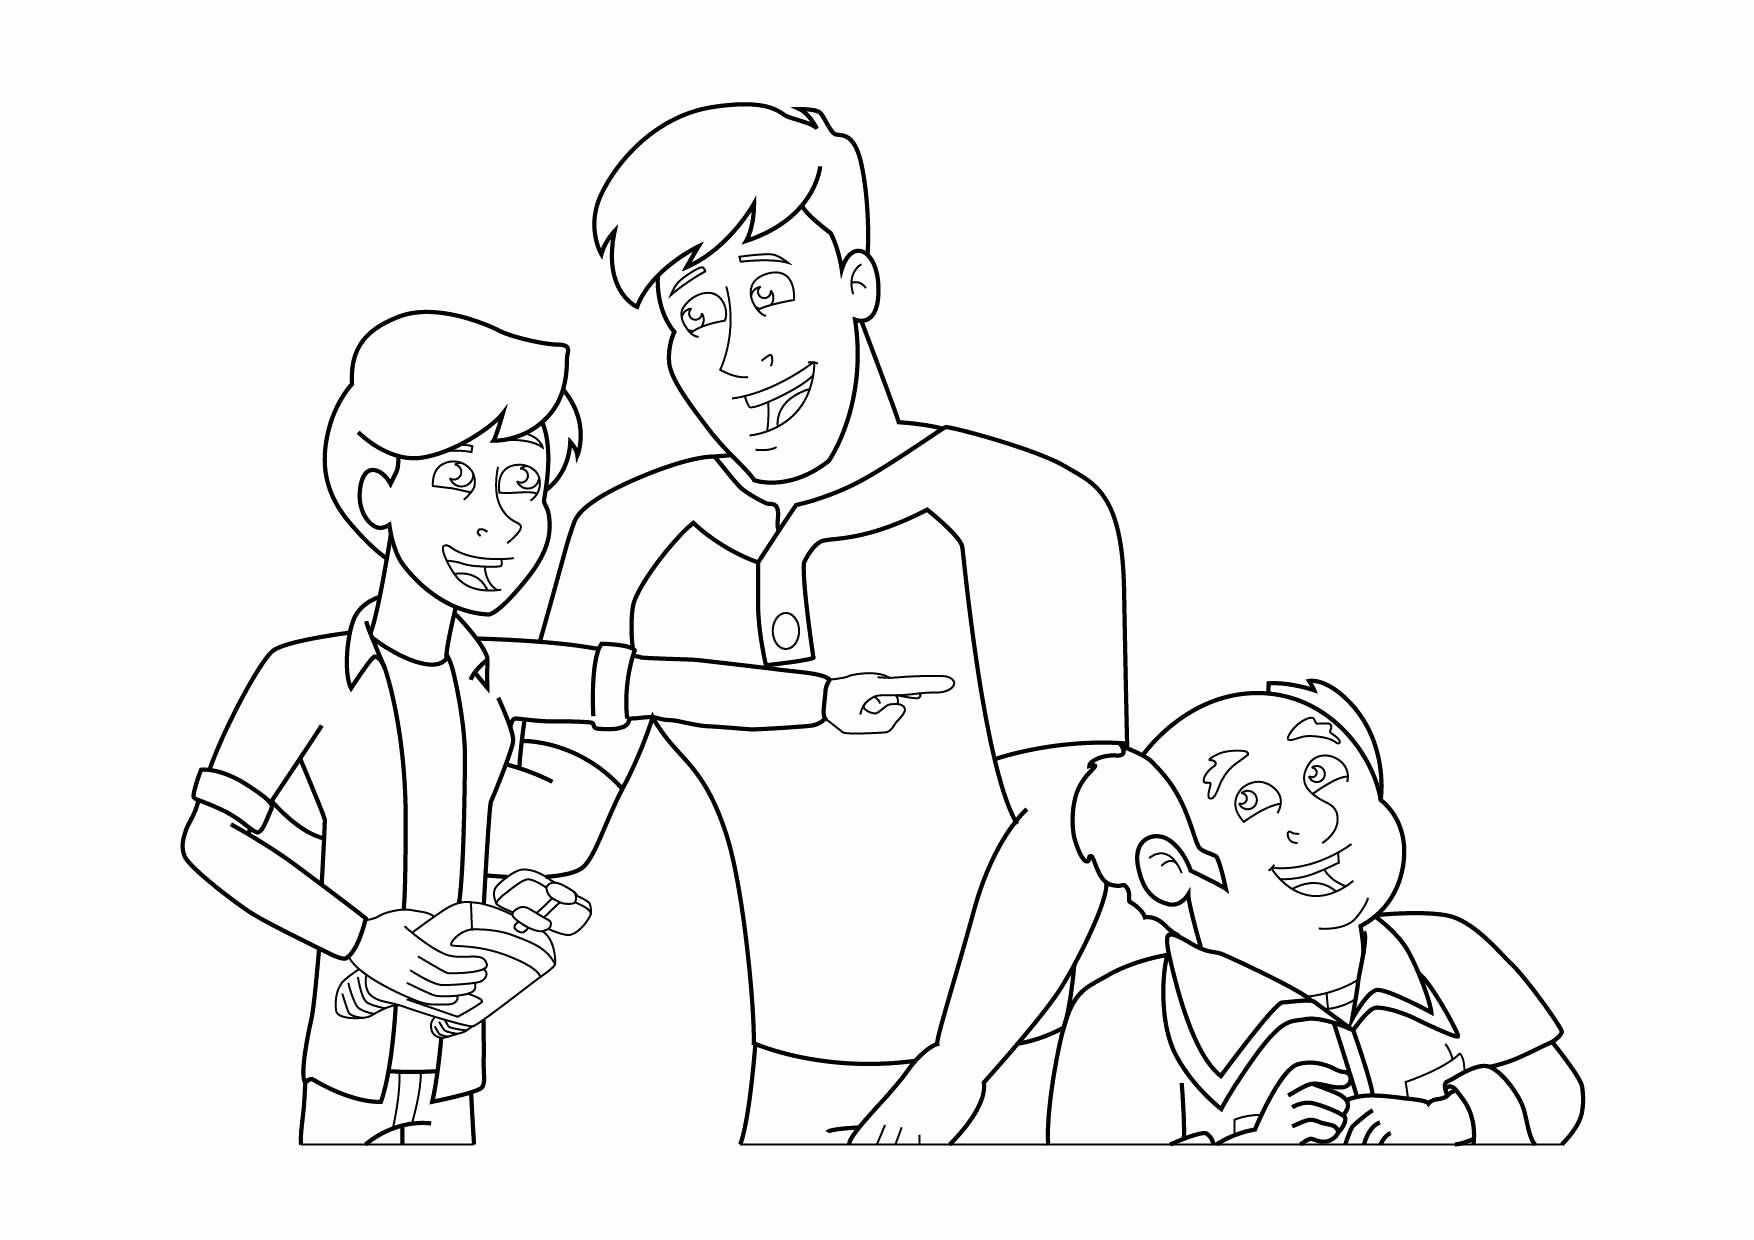 Kid Danger Coloring Pages.